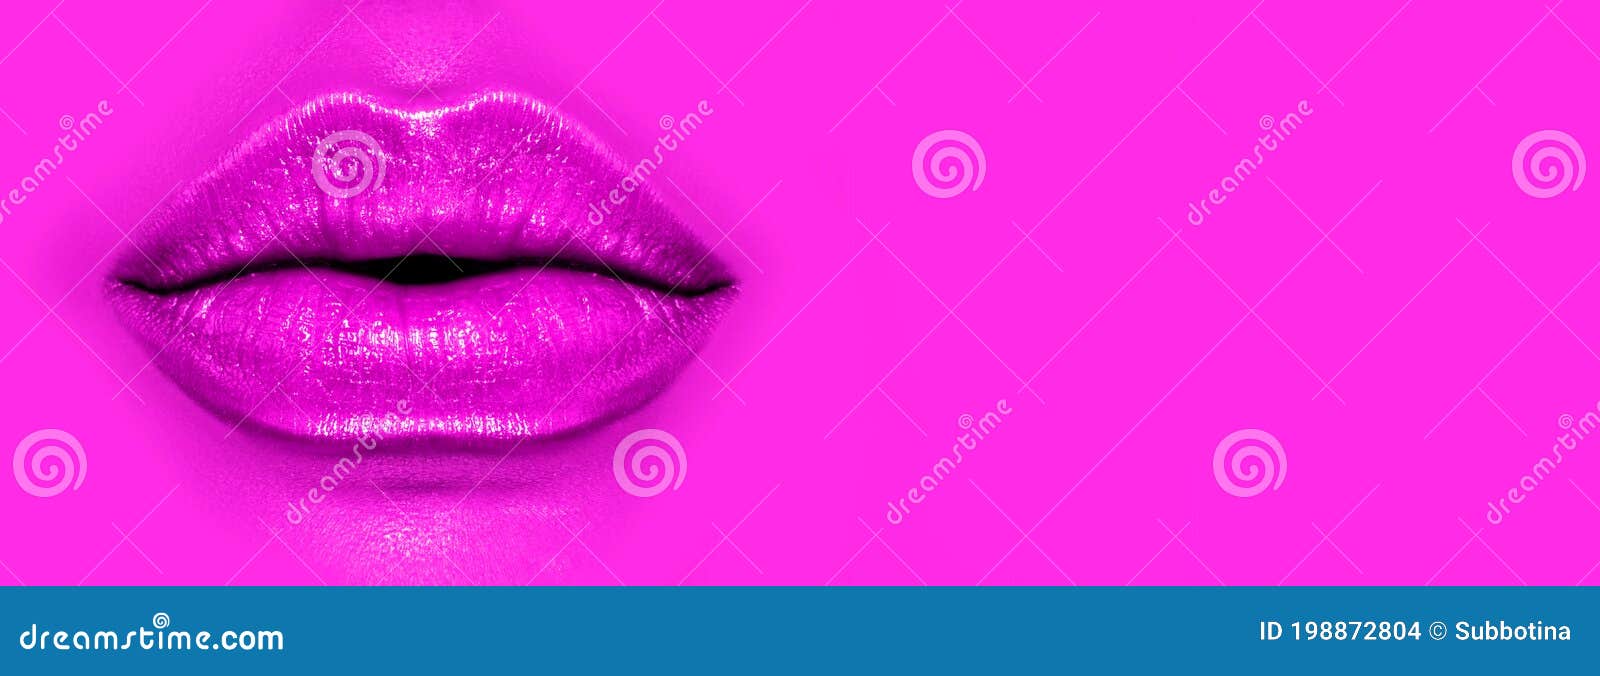 beautiful young woman`s lips closeup, on purple background. plastic surgery, fillers, injection. part of the model girl face